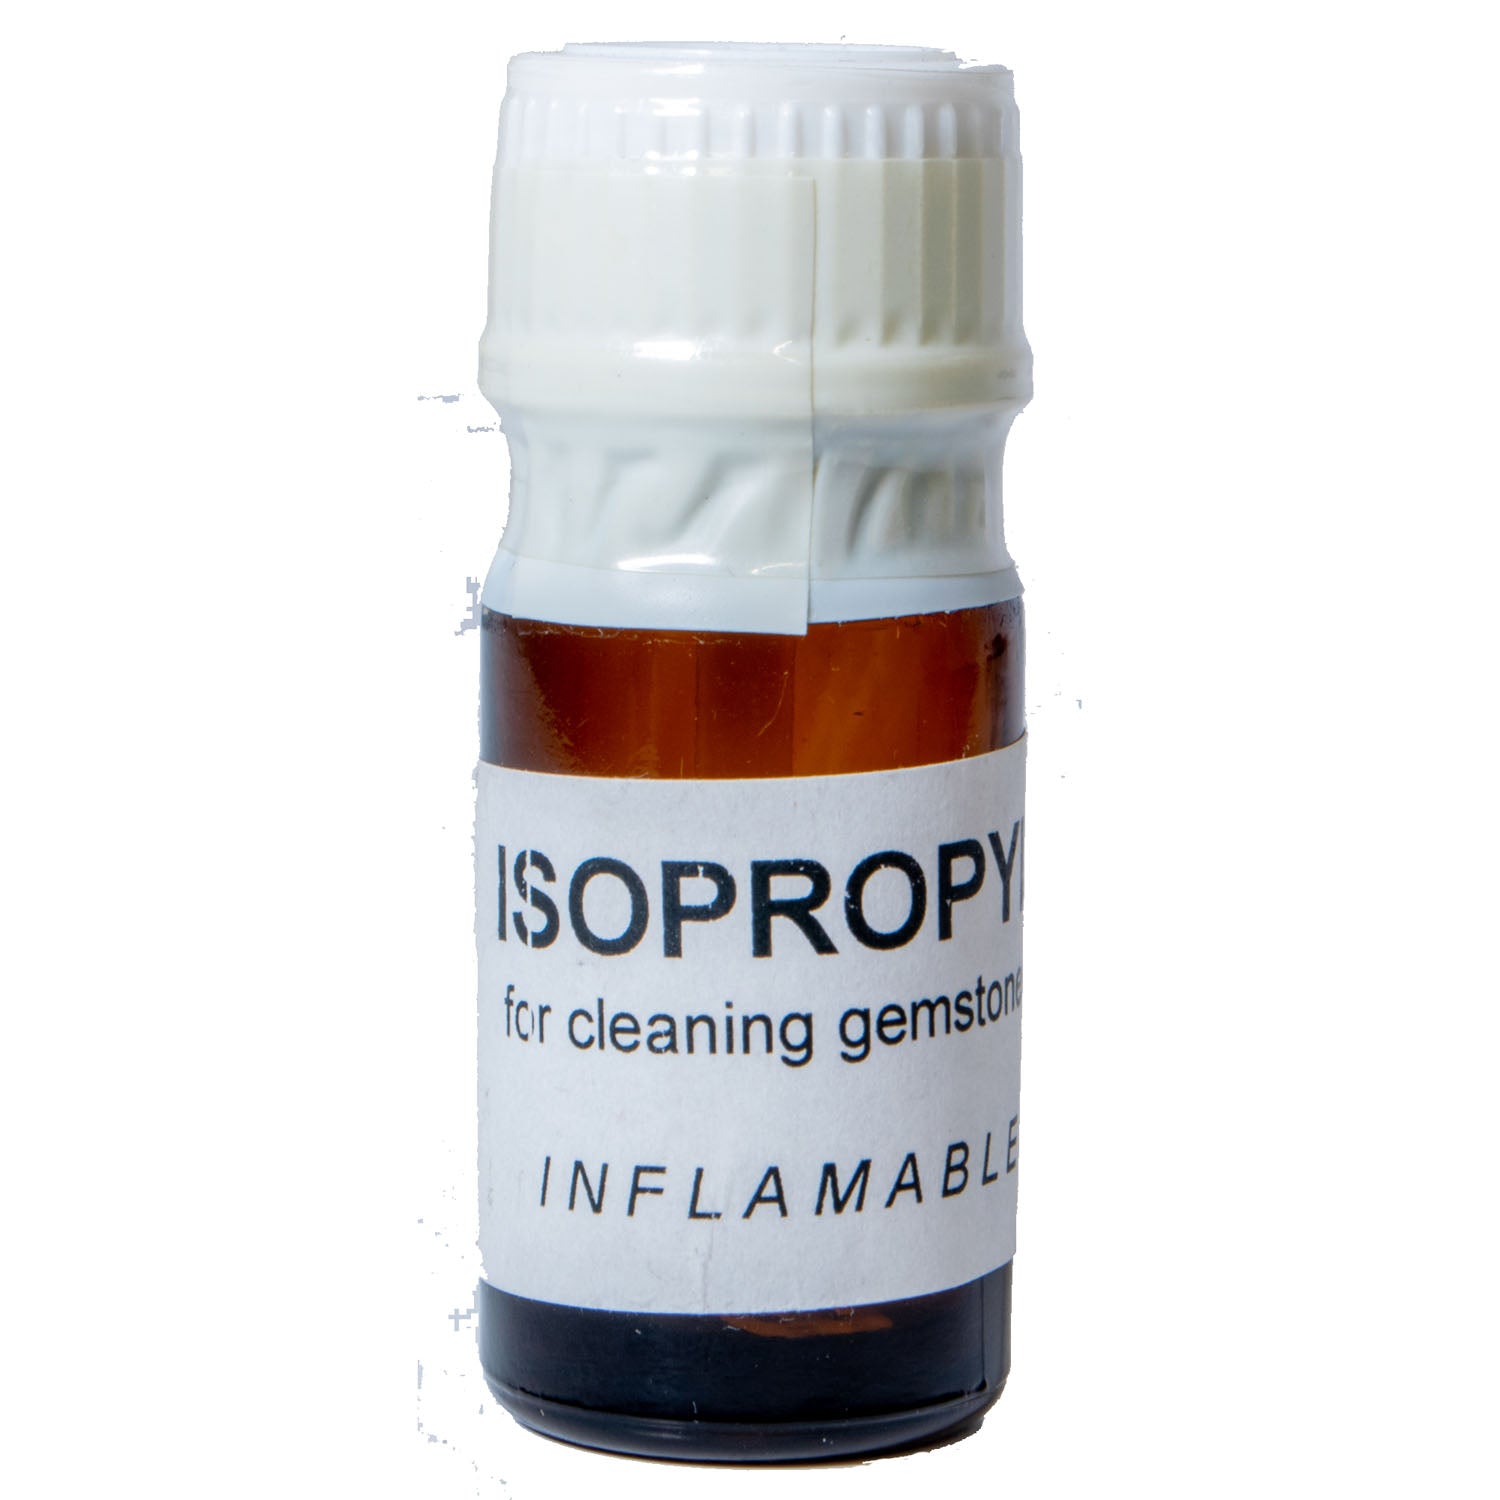 Bottle of Isopropyl for cleaning stones